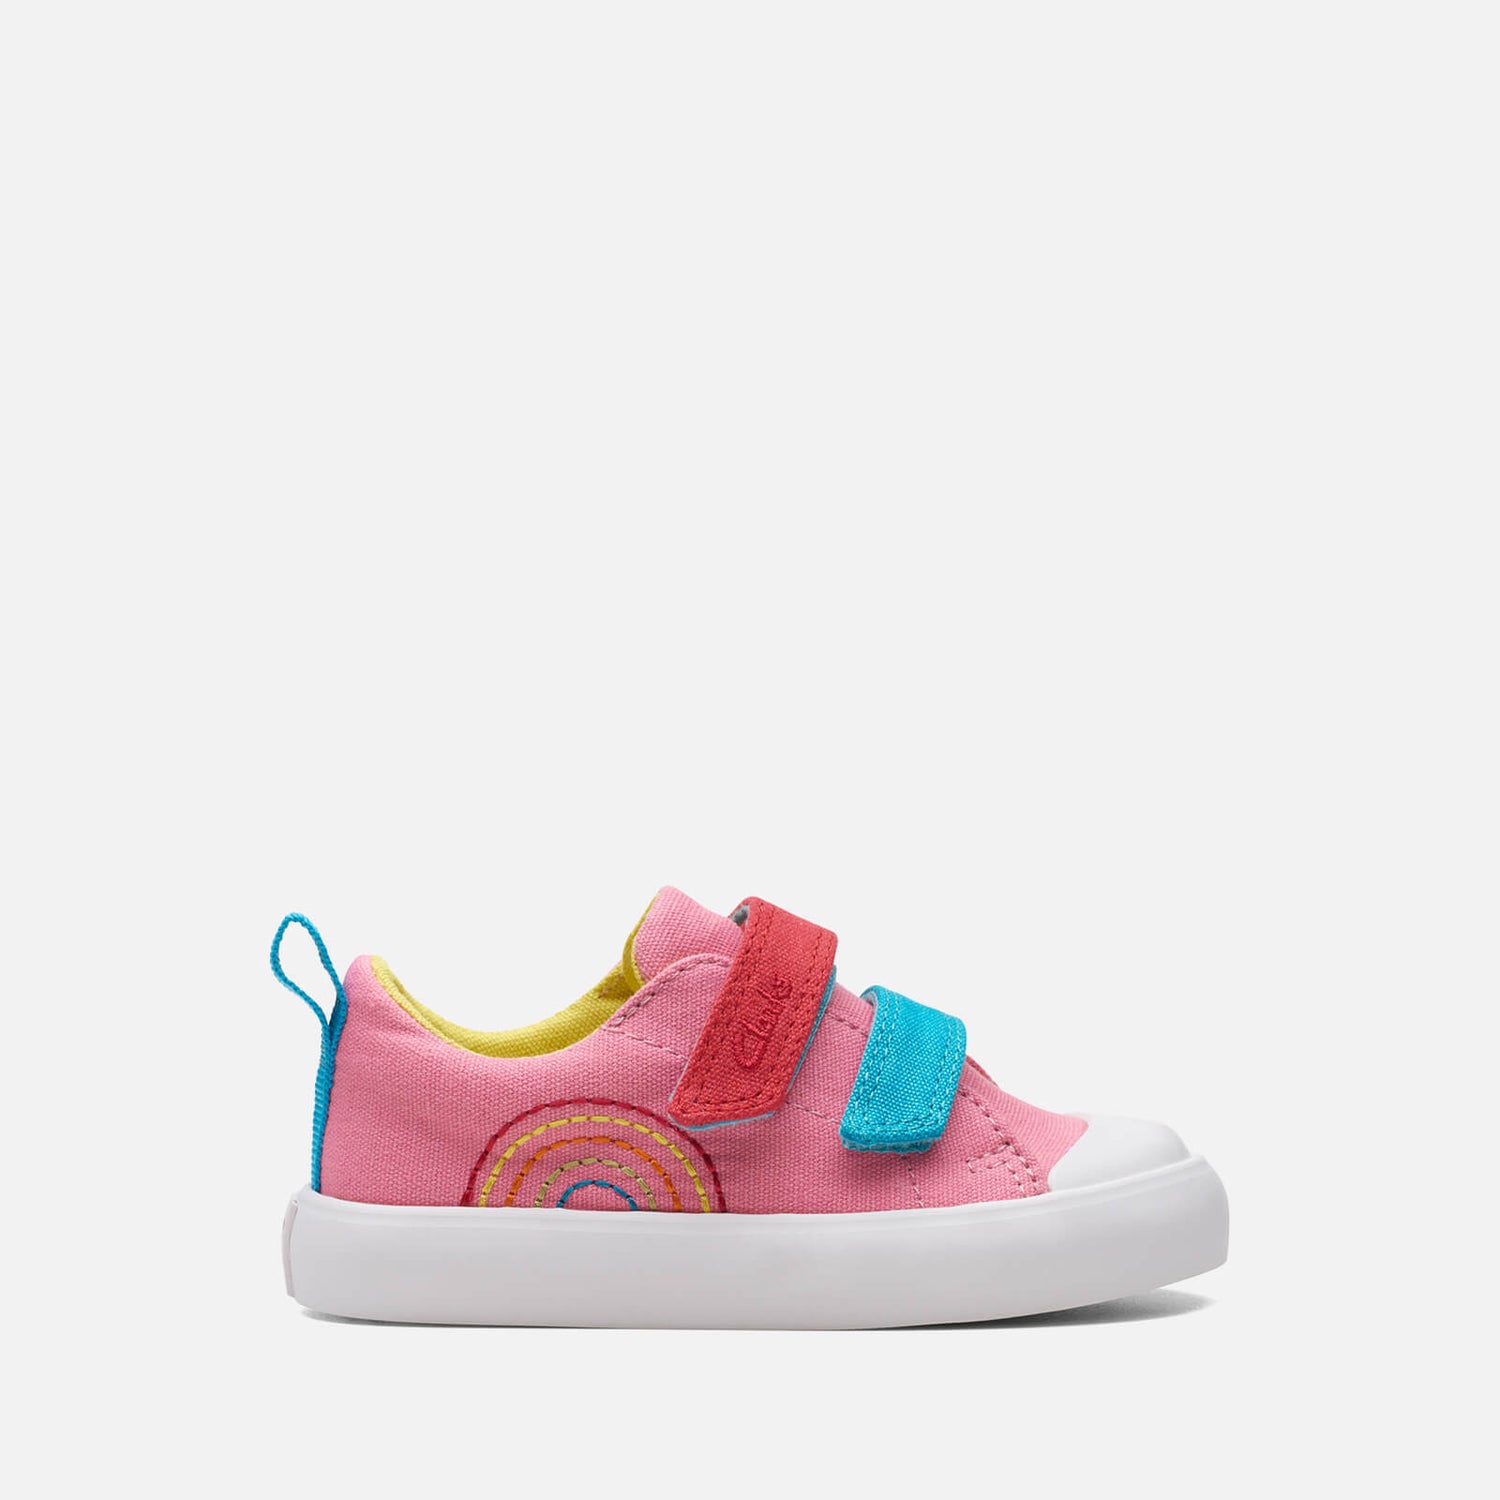 Clarks Toddlers' Foxing TorLo Canvas Shoes - Pink - UK 4 Baby